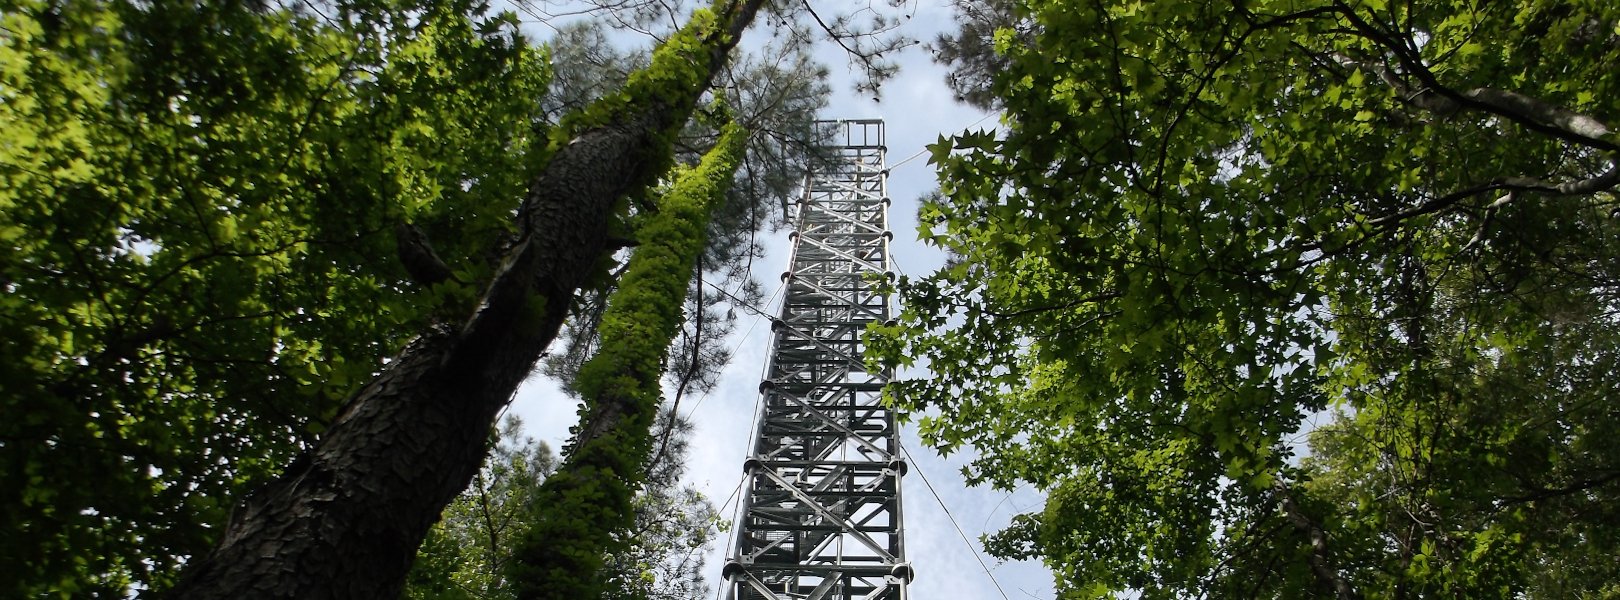 LENO tower from bottom looking toward top of forest canopy